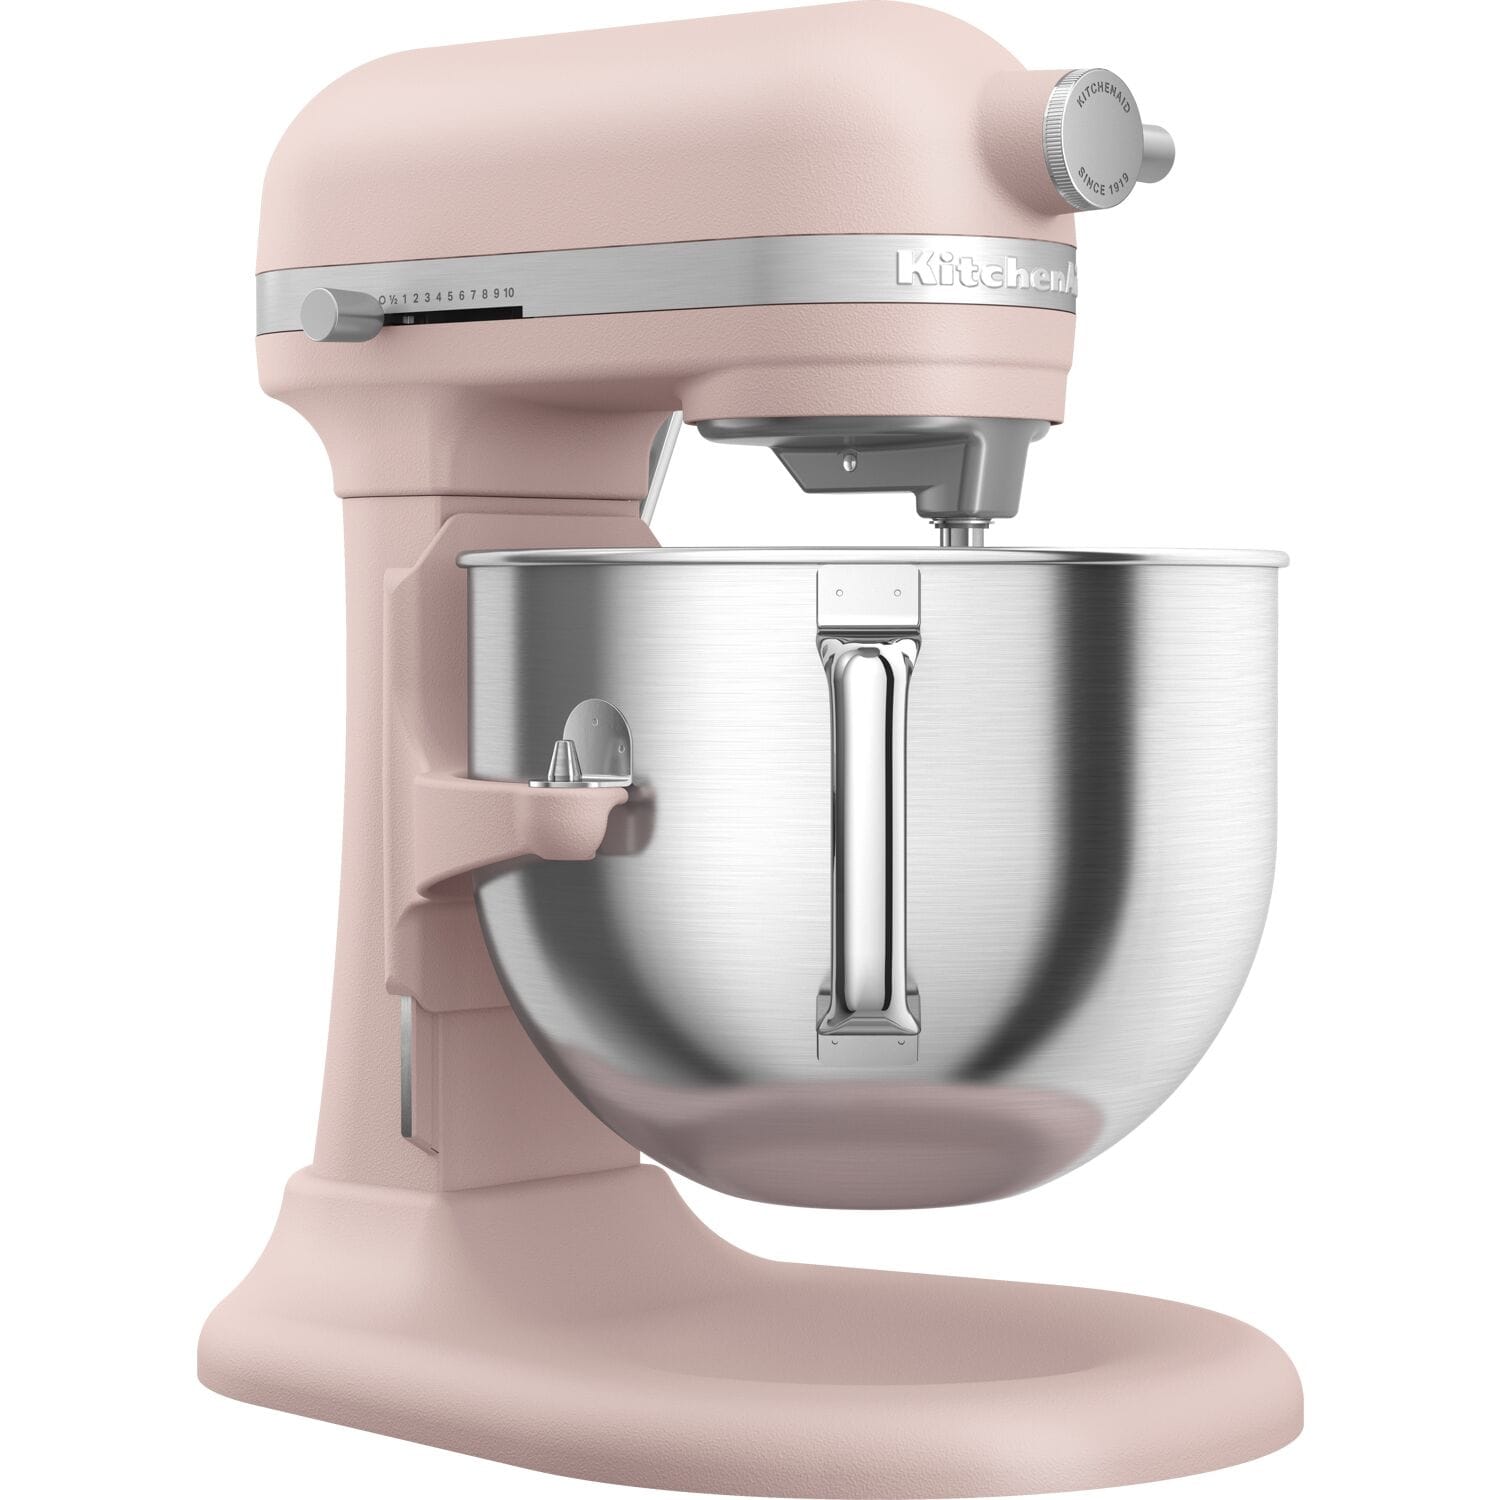 KitchenAid 7-Qt. Bowl Lift Stand Mixer in Feather Pink - Bed Bath & Beyond  - 38319672